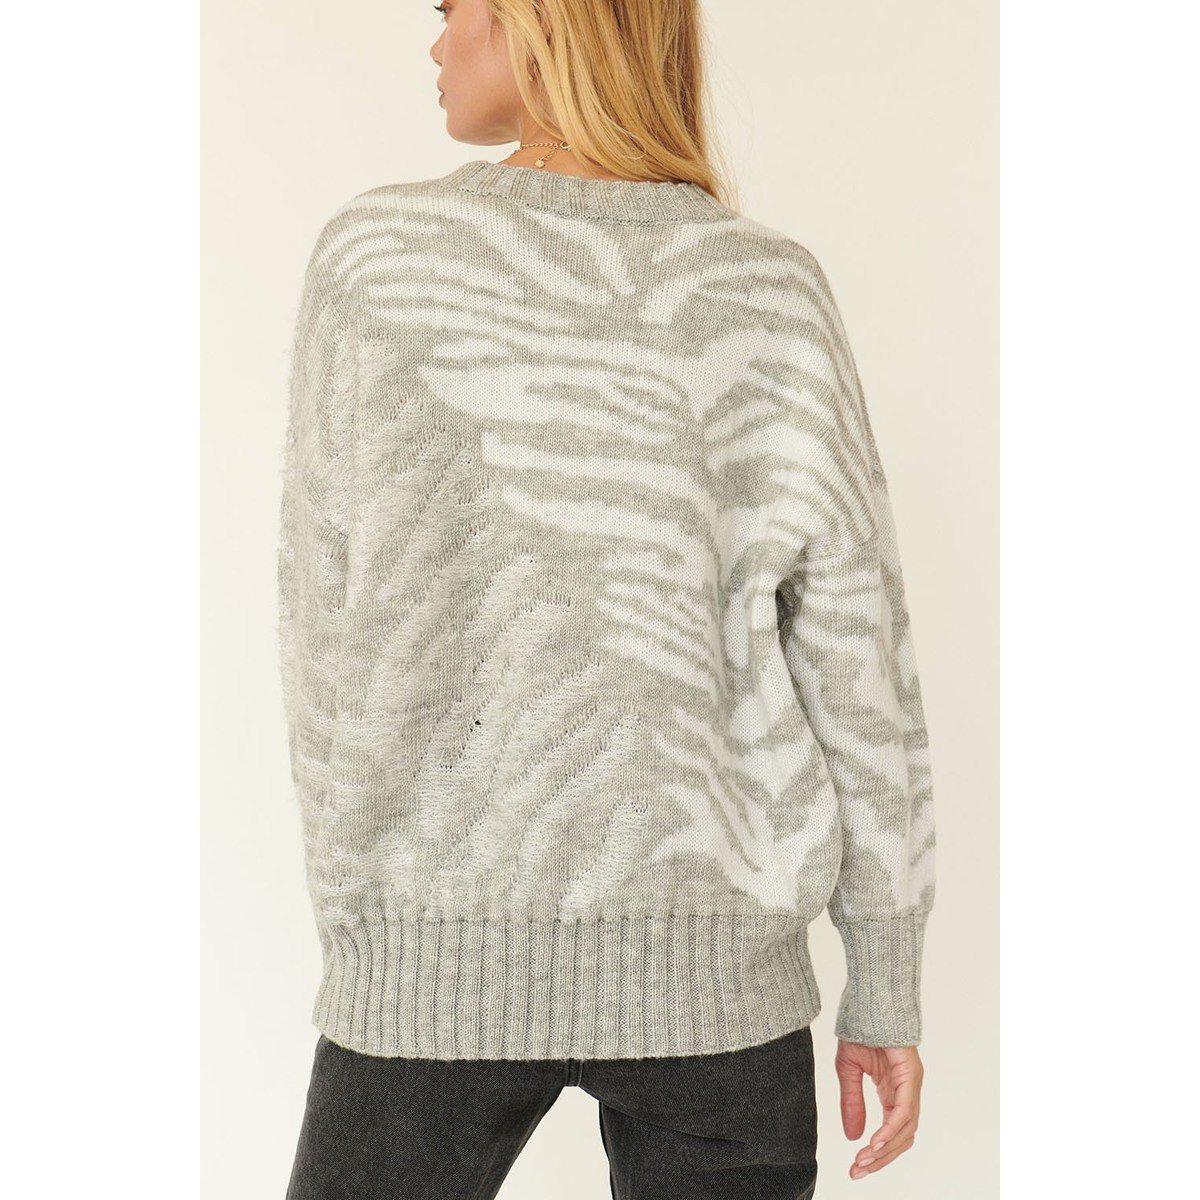 A Zebra Print Pullover Sweater-Clothing Sweaters-NXTLVLNYC